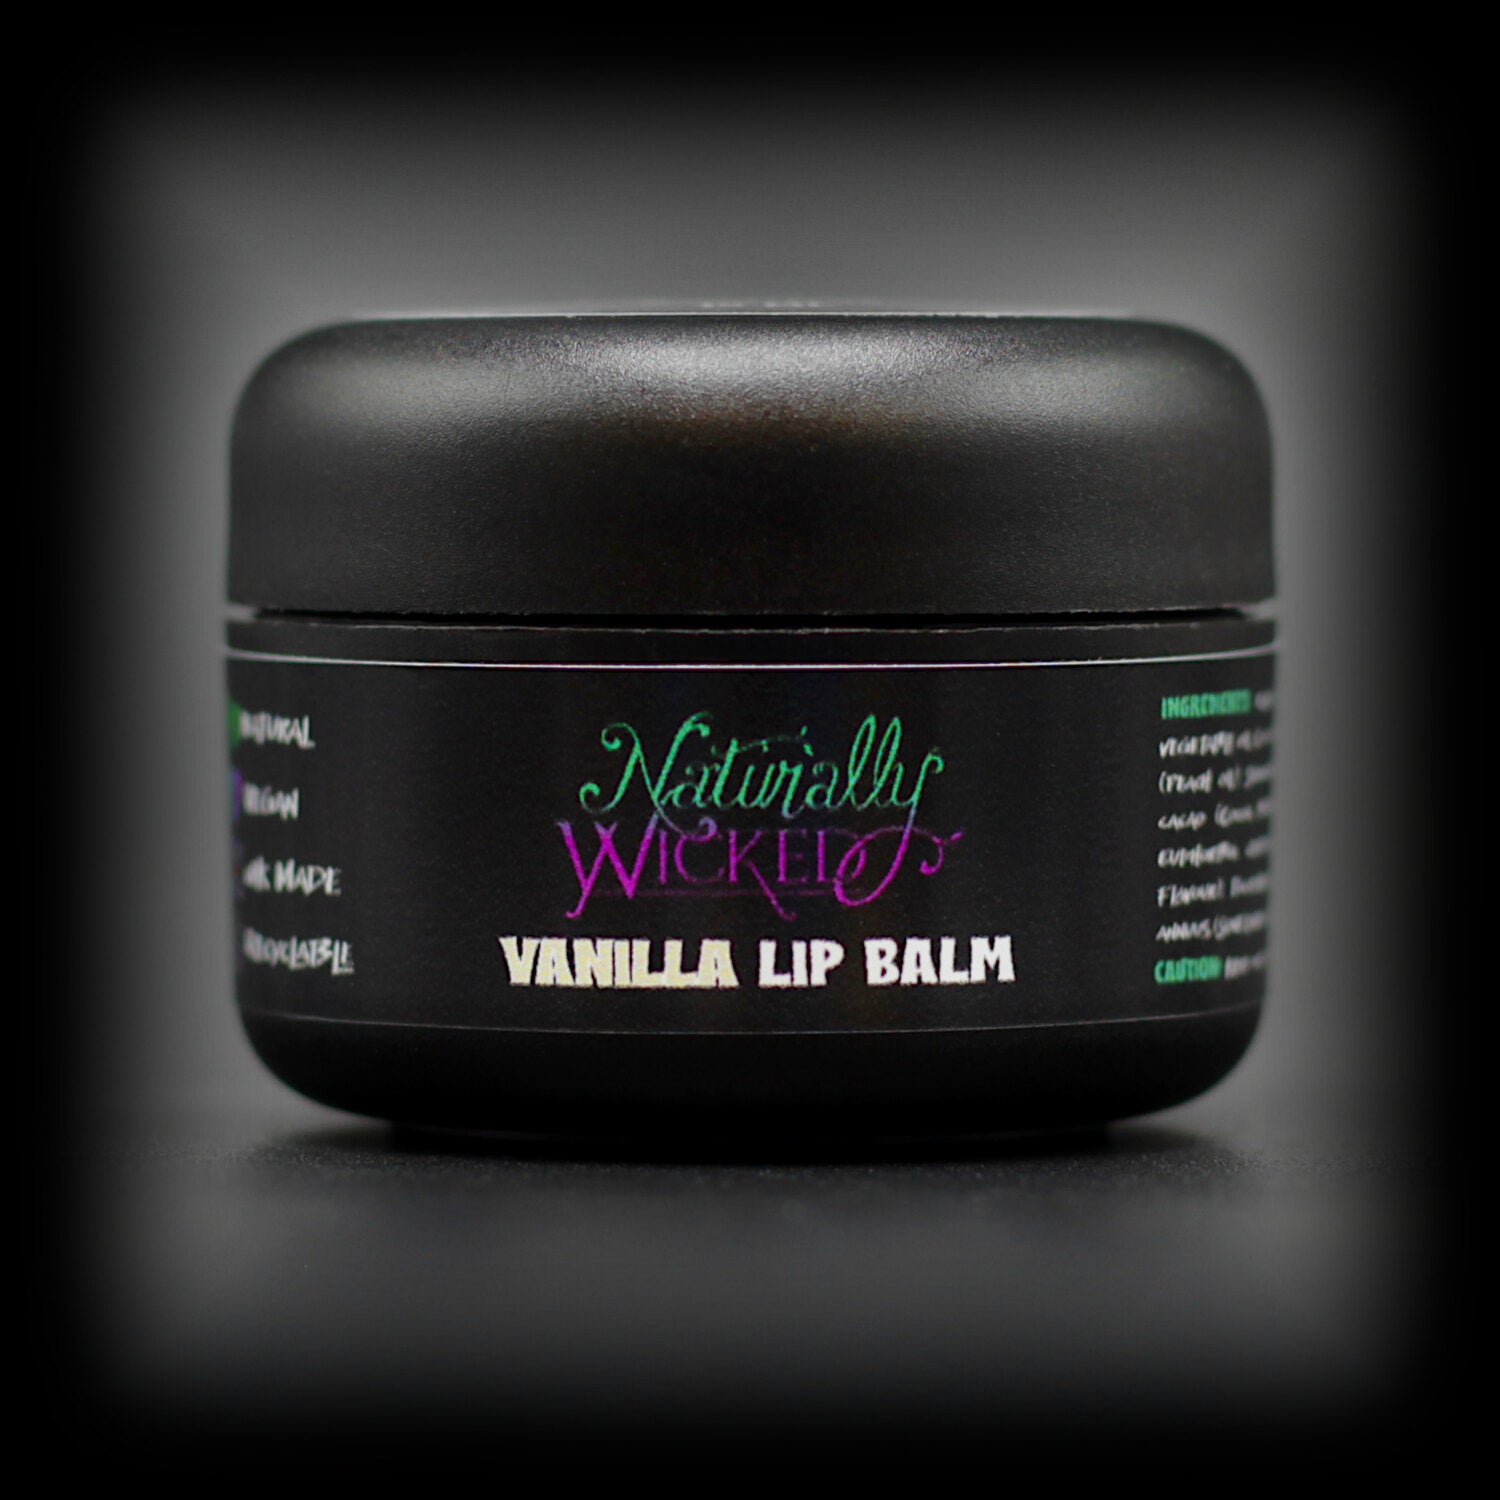 15ml Naturally Wicked Vanilla Lip Balm In Compact Black Pocket Container